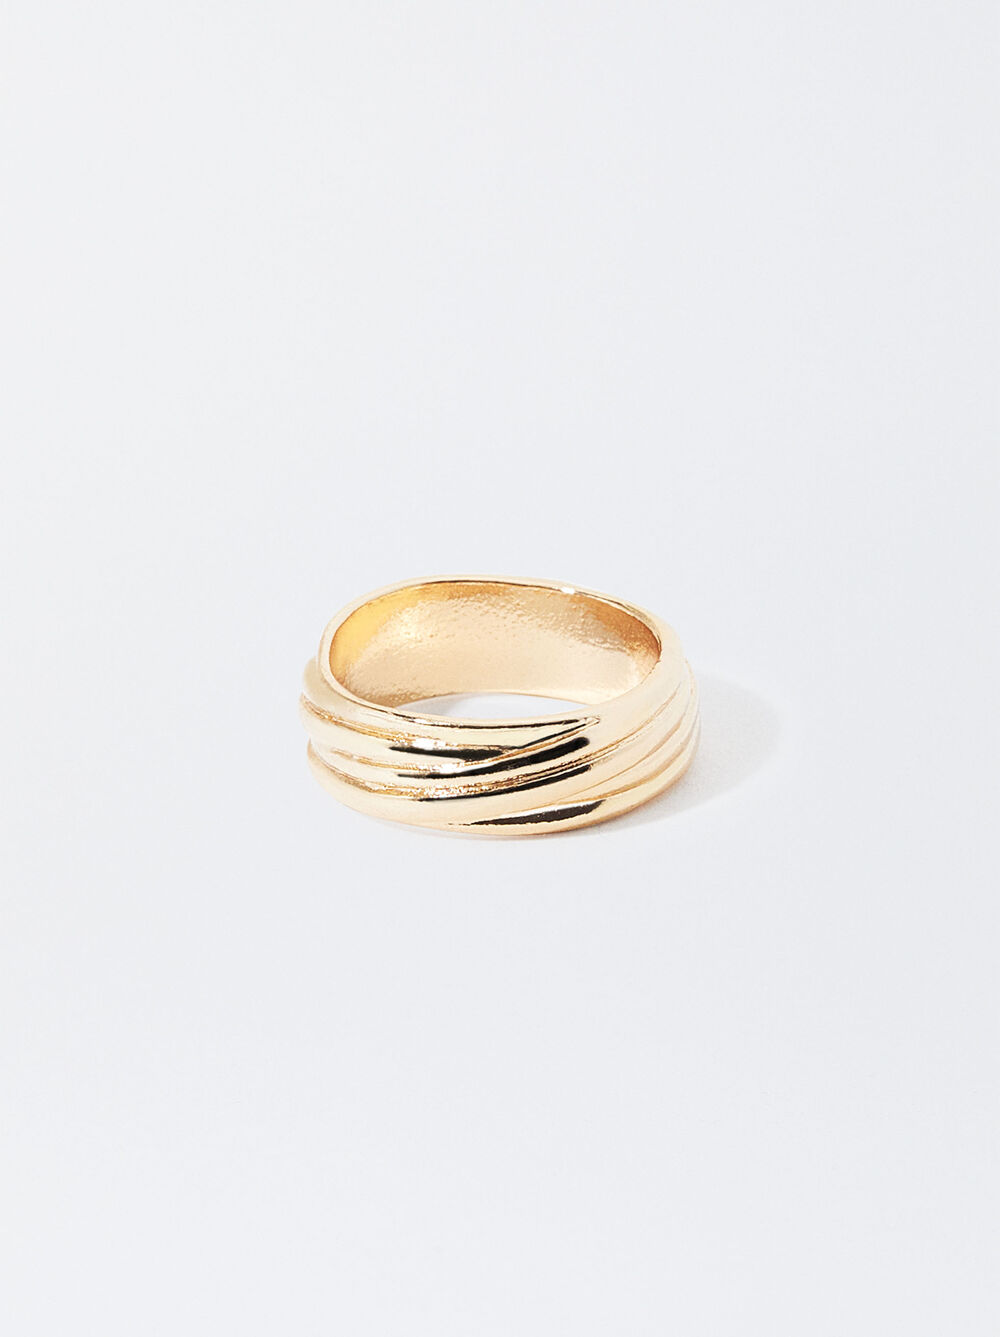 Intertwined Golden Ring